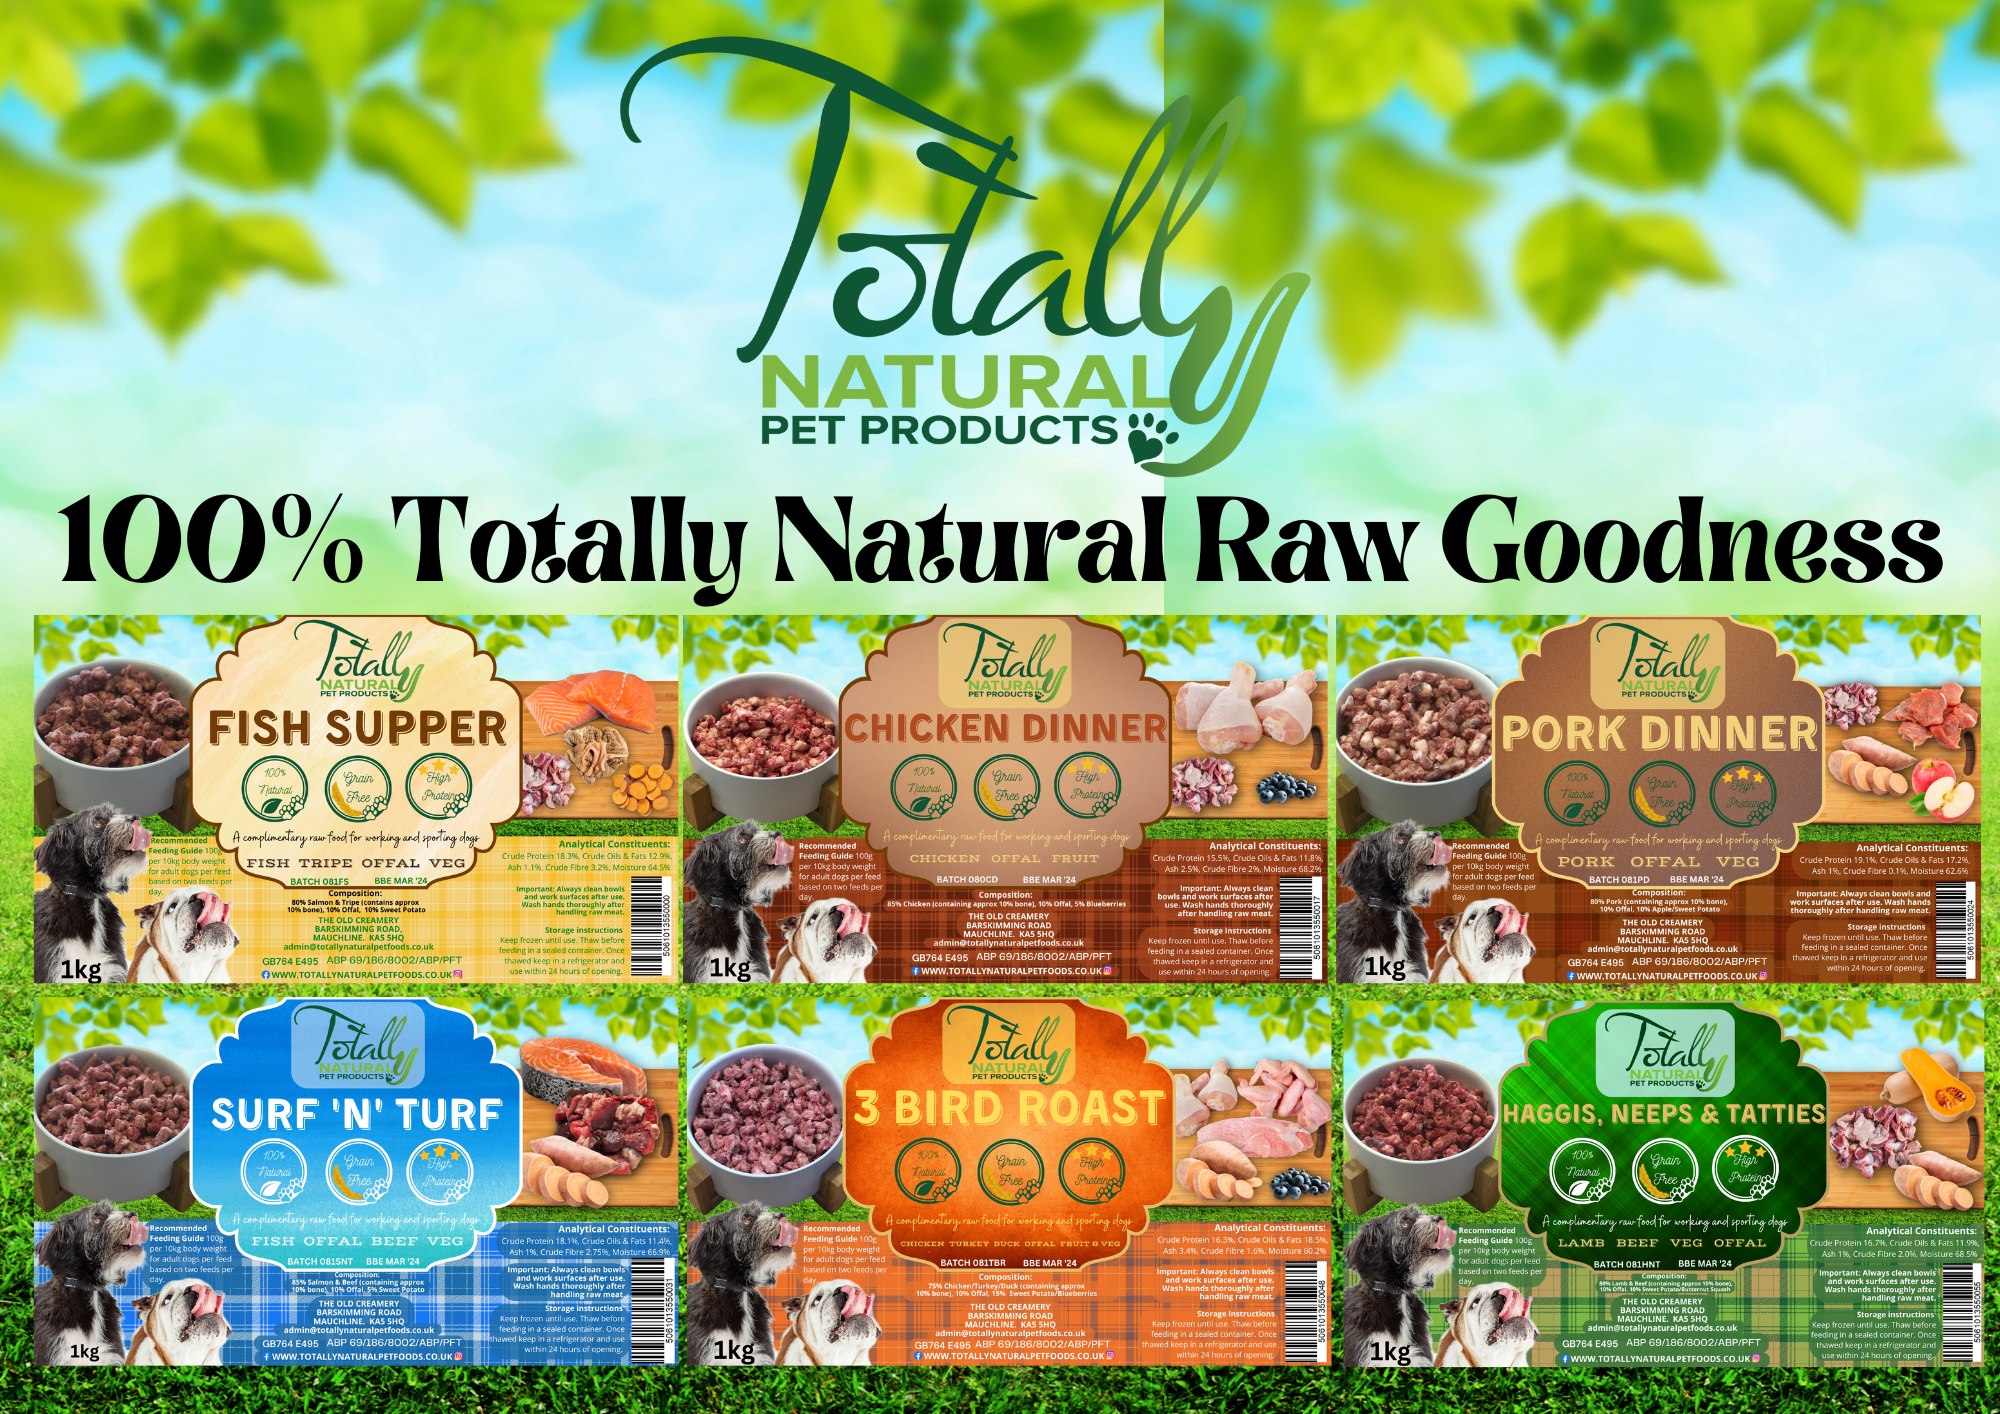 Totally Natural Surf & Turf (1kg)